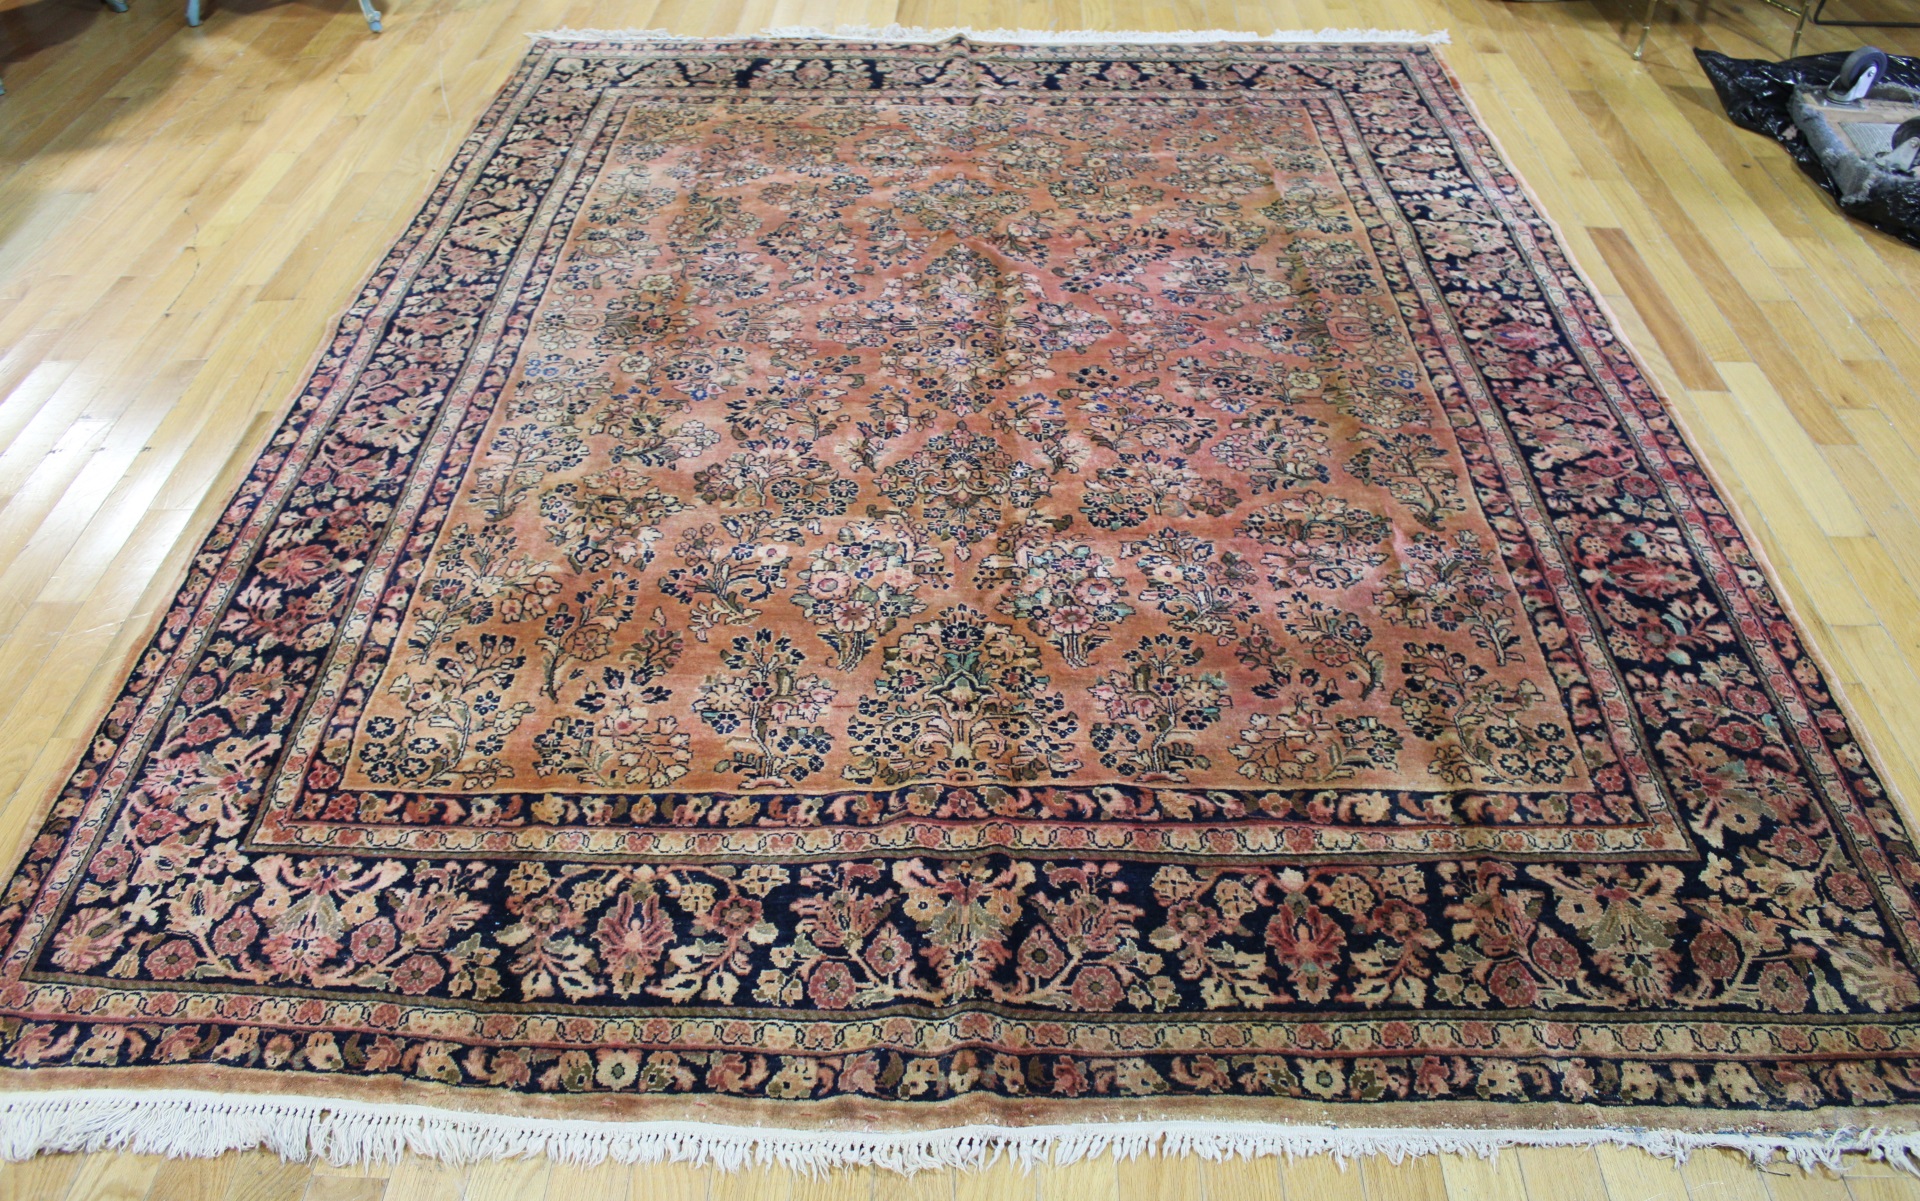 ANTIQUE AND FINELY HAND WOVEN SAROUK